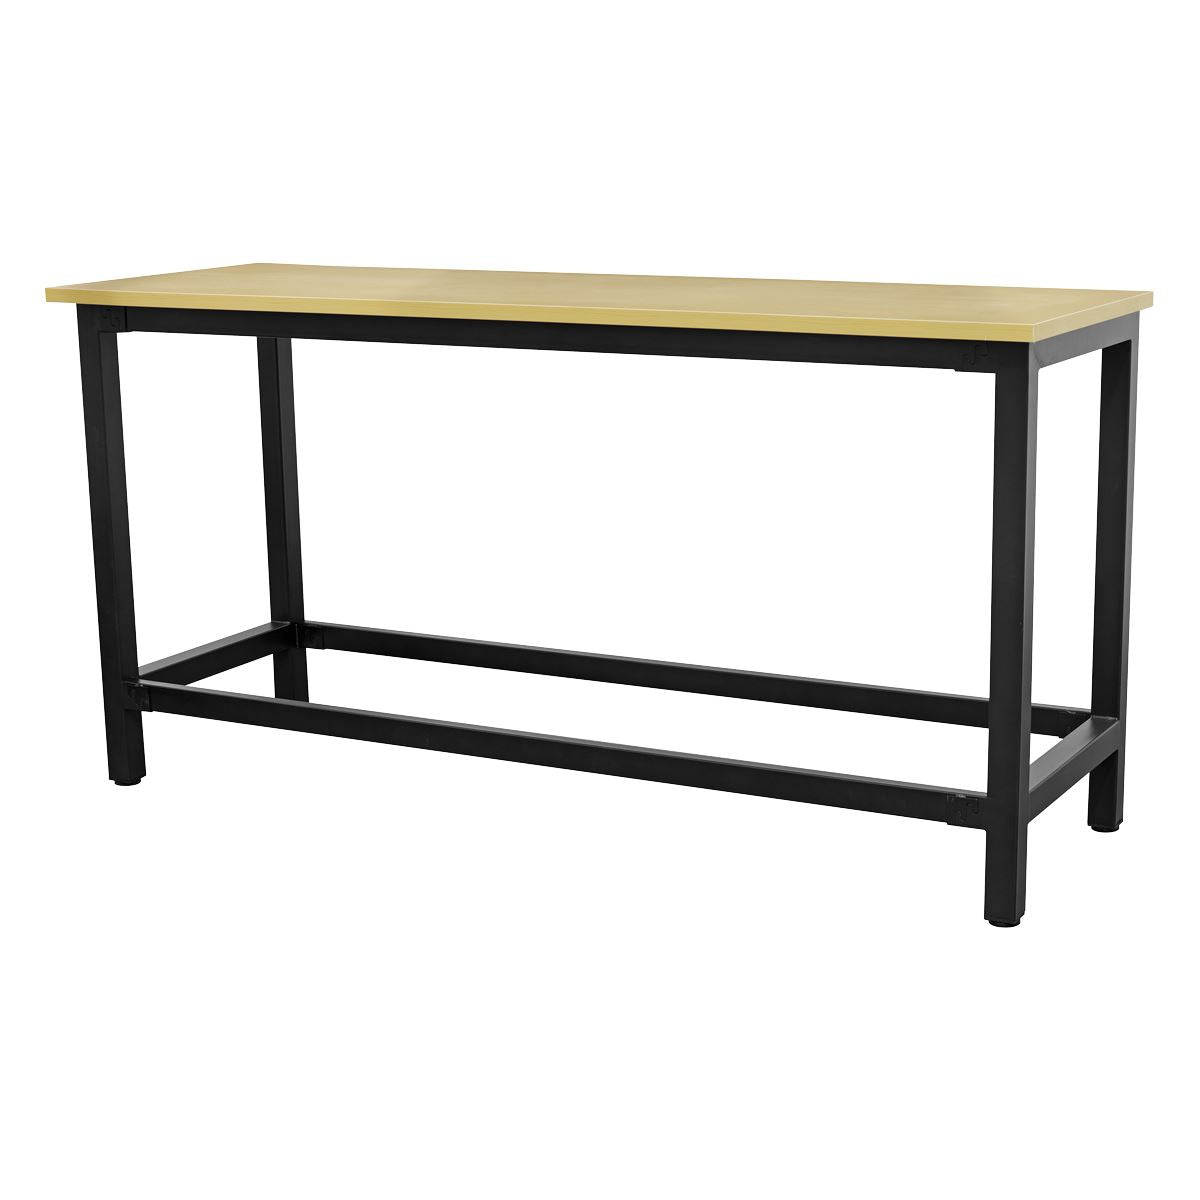 Sealey Workbench 1.8m Steel with 25mm MDF Top